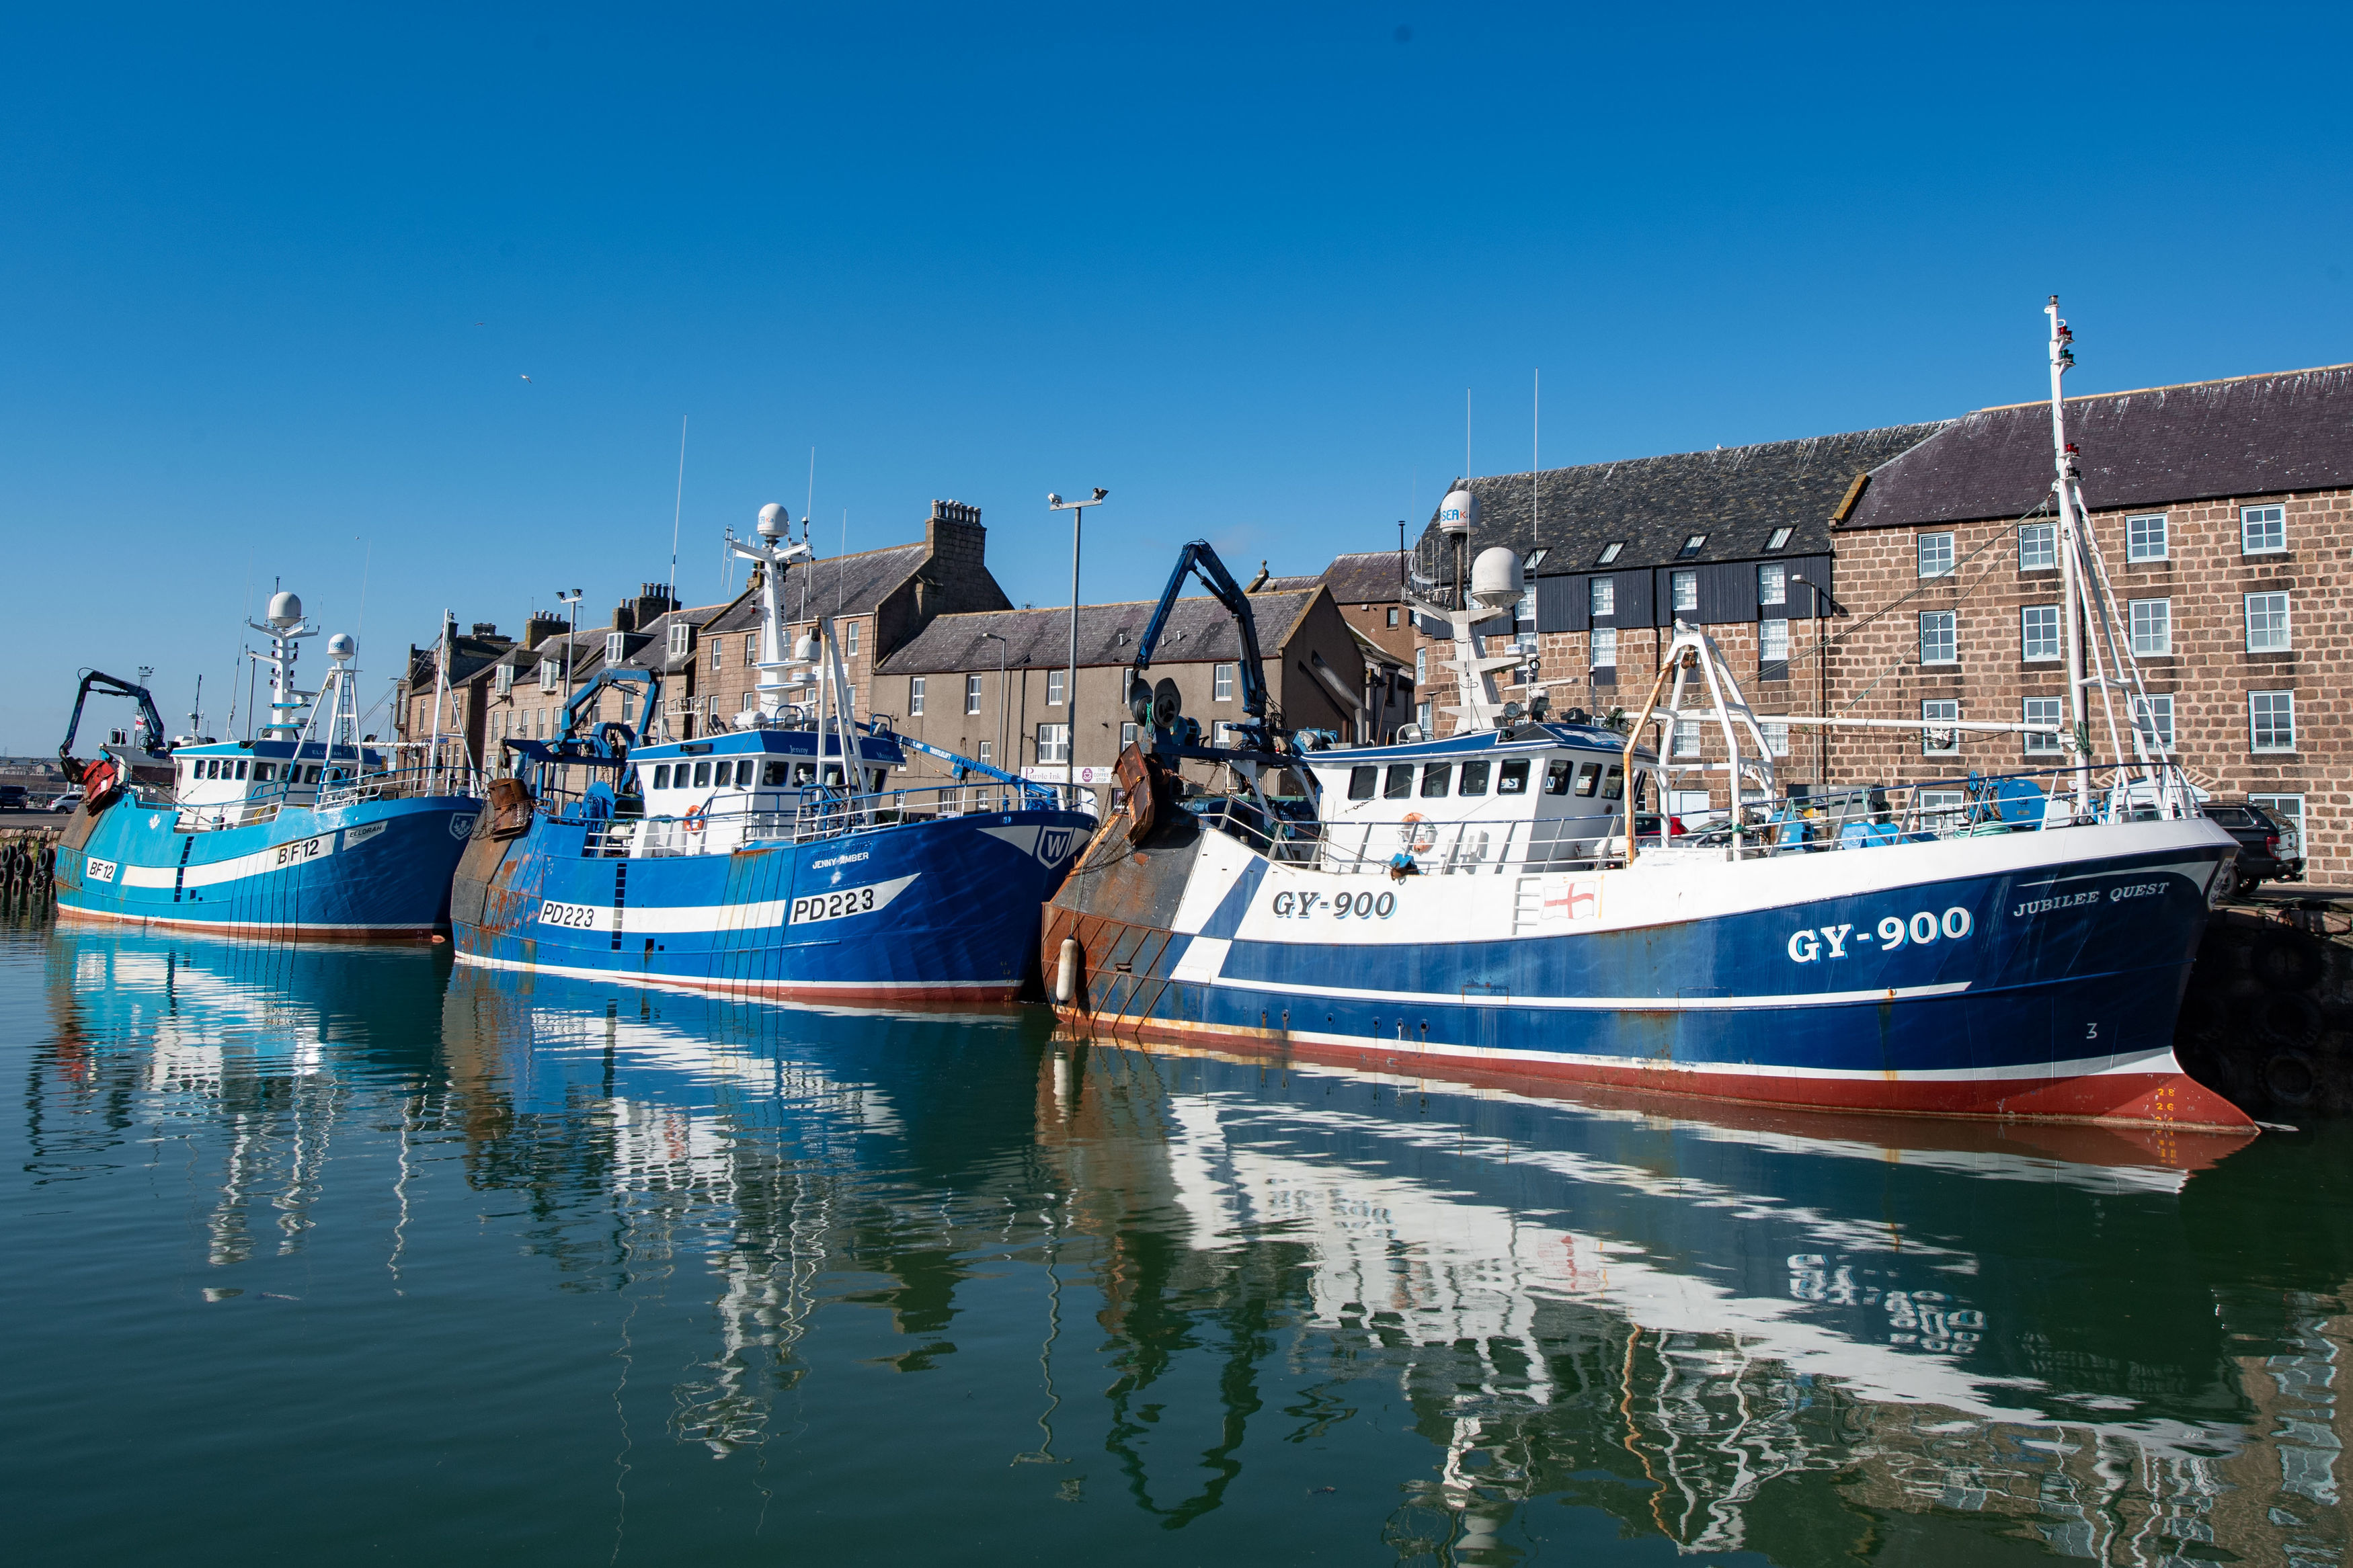 Fishing boats in the harbour at Peterhead, where barbie would make a visit.